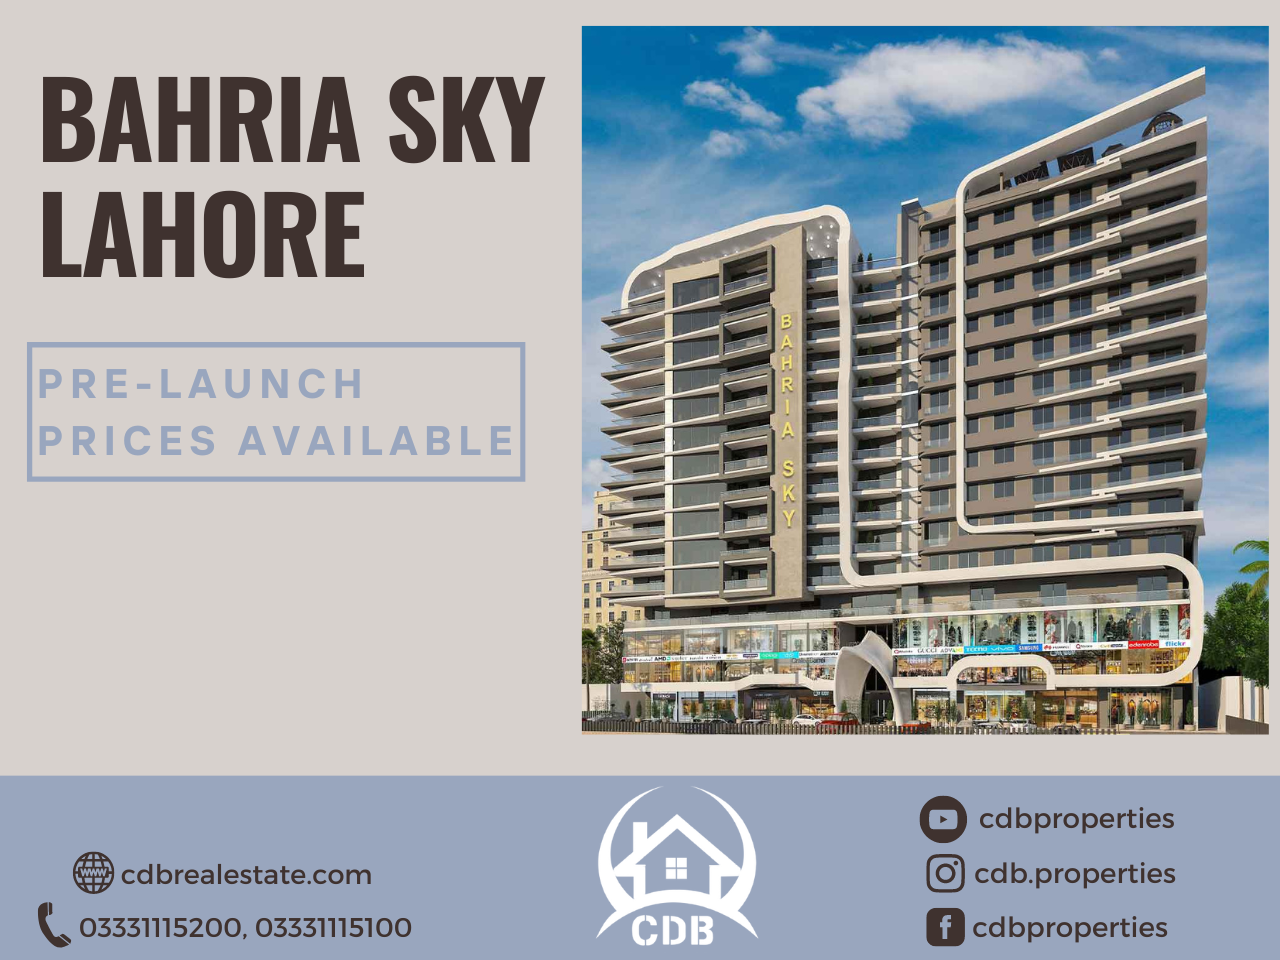 Bahria Sky Lahore Pre Launch Prices Available